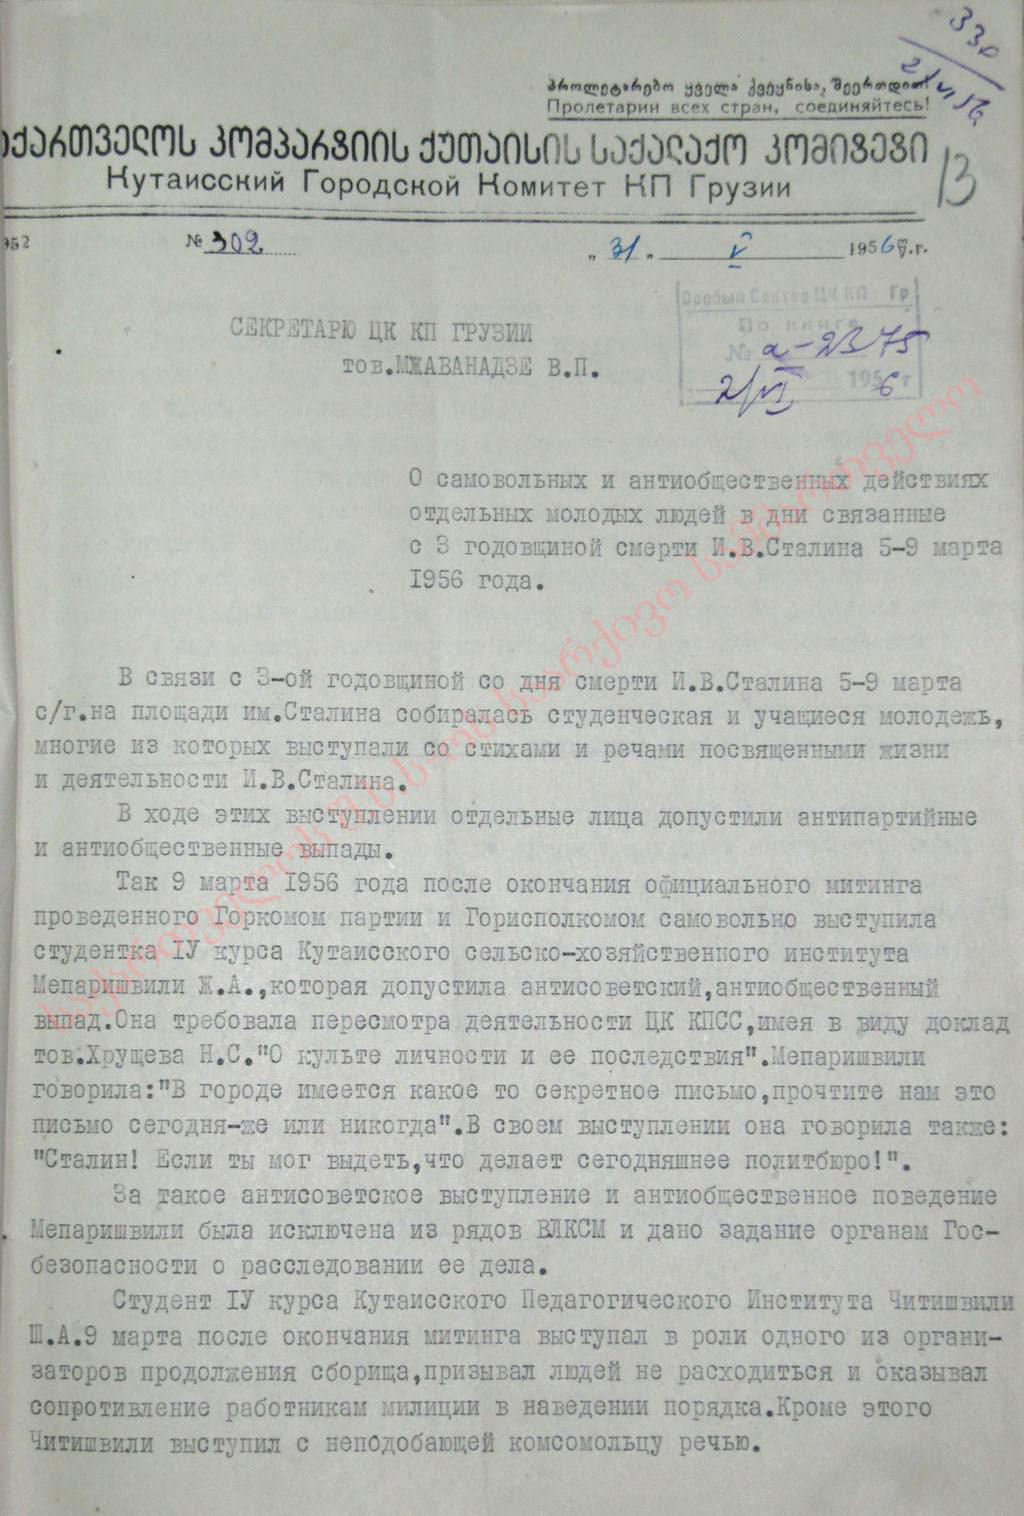 A Report of E.Takidze, a secretary of Kutaisi Сity Сommittee of Communist Party of Georgia 